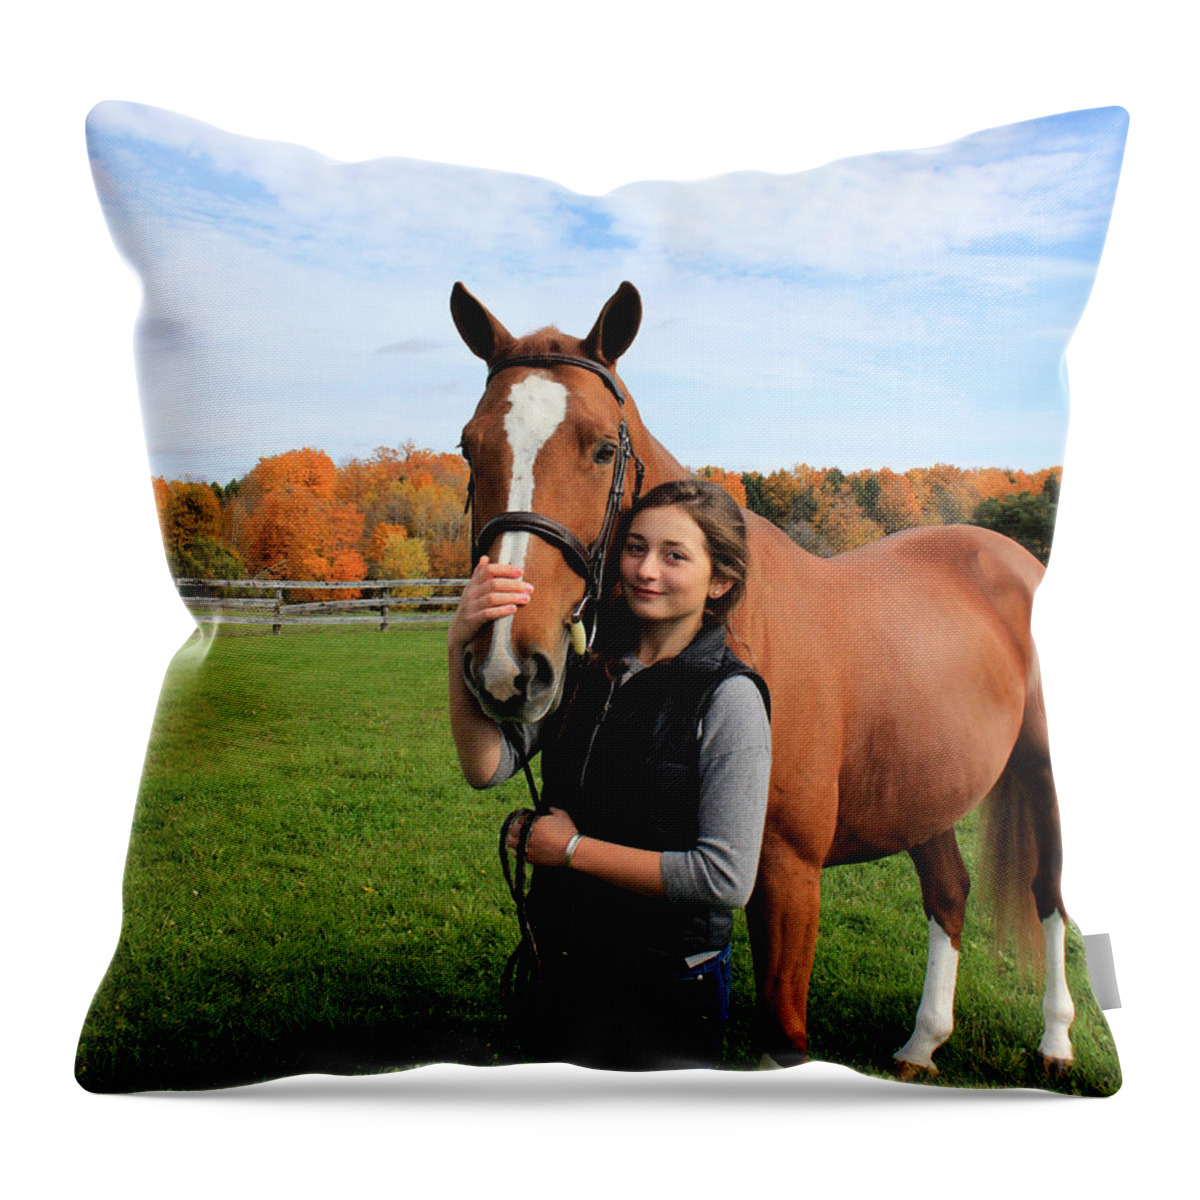  Throw Pillow featuring the photograph Katherine Pal 18 by Life With Horses